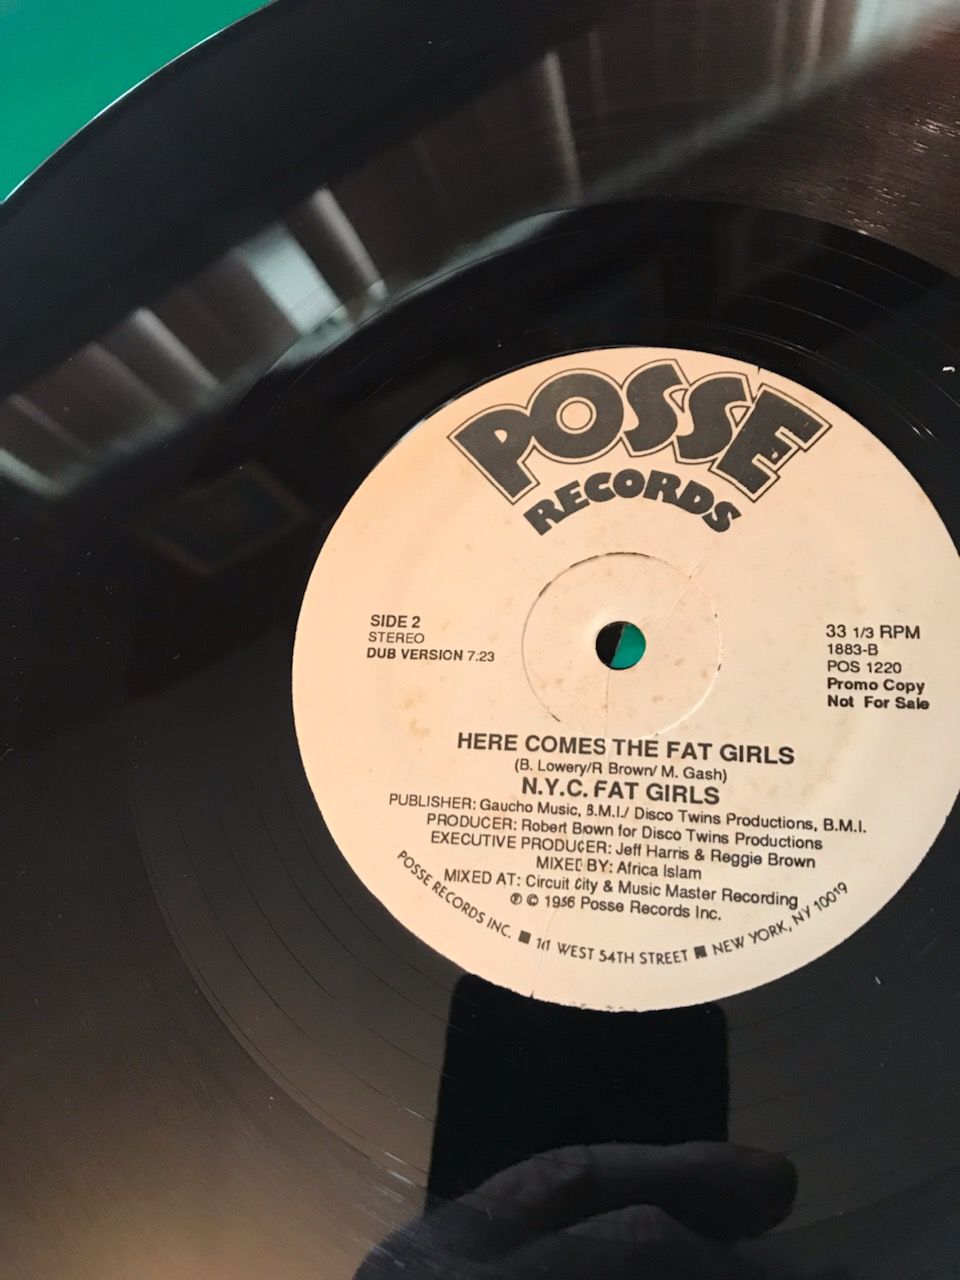 N.Y.C. Fat Girls - Here Comes The Fat Girls - Posse Rec... 2